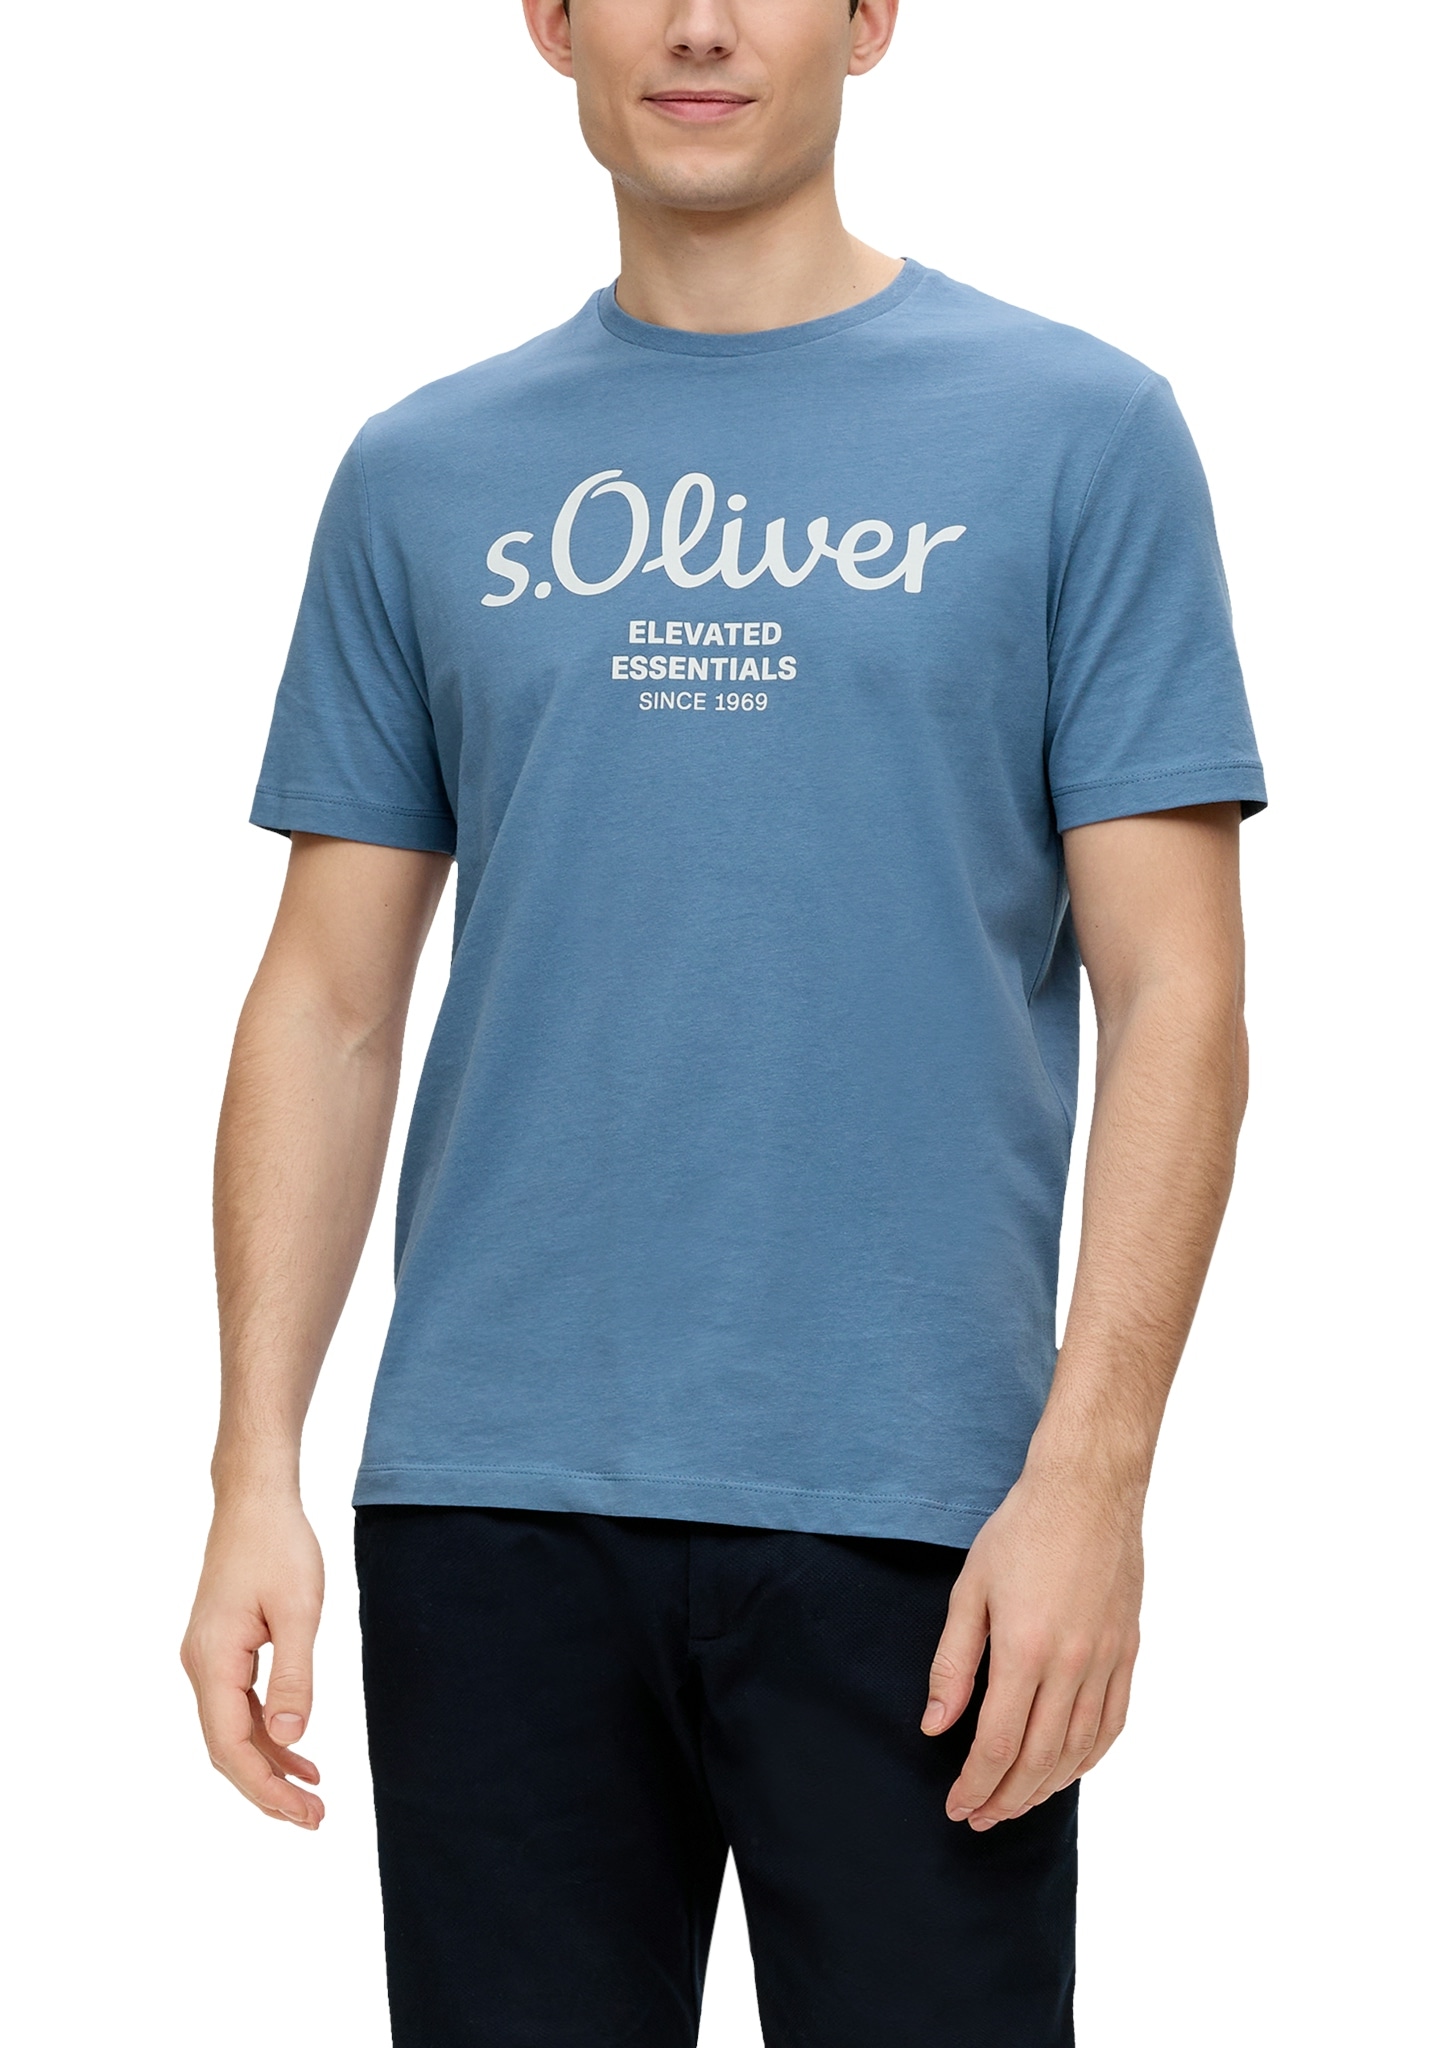 s.Oliver T-Shirt, im Look sportiven OTTO bei online